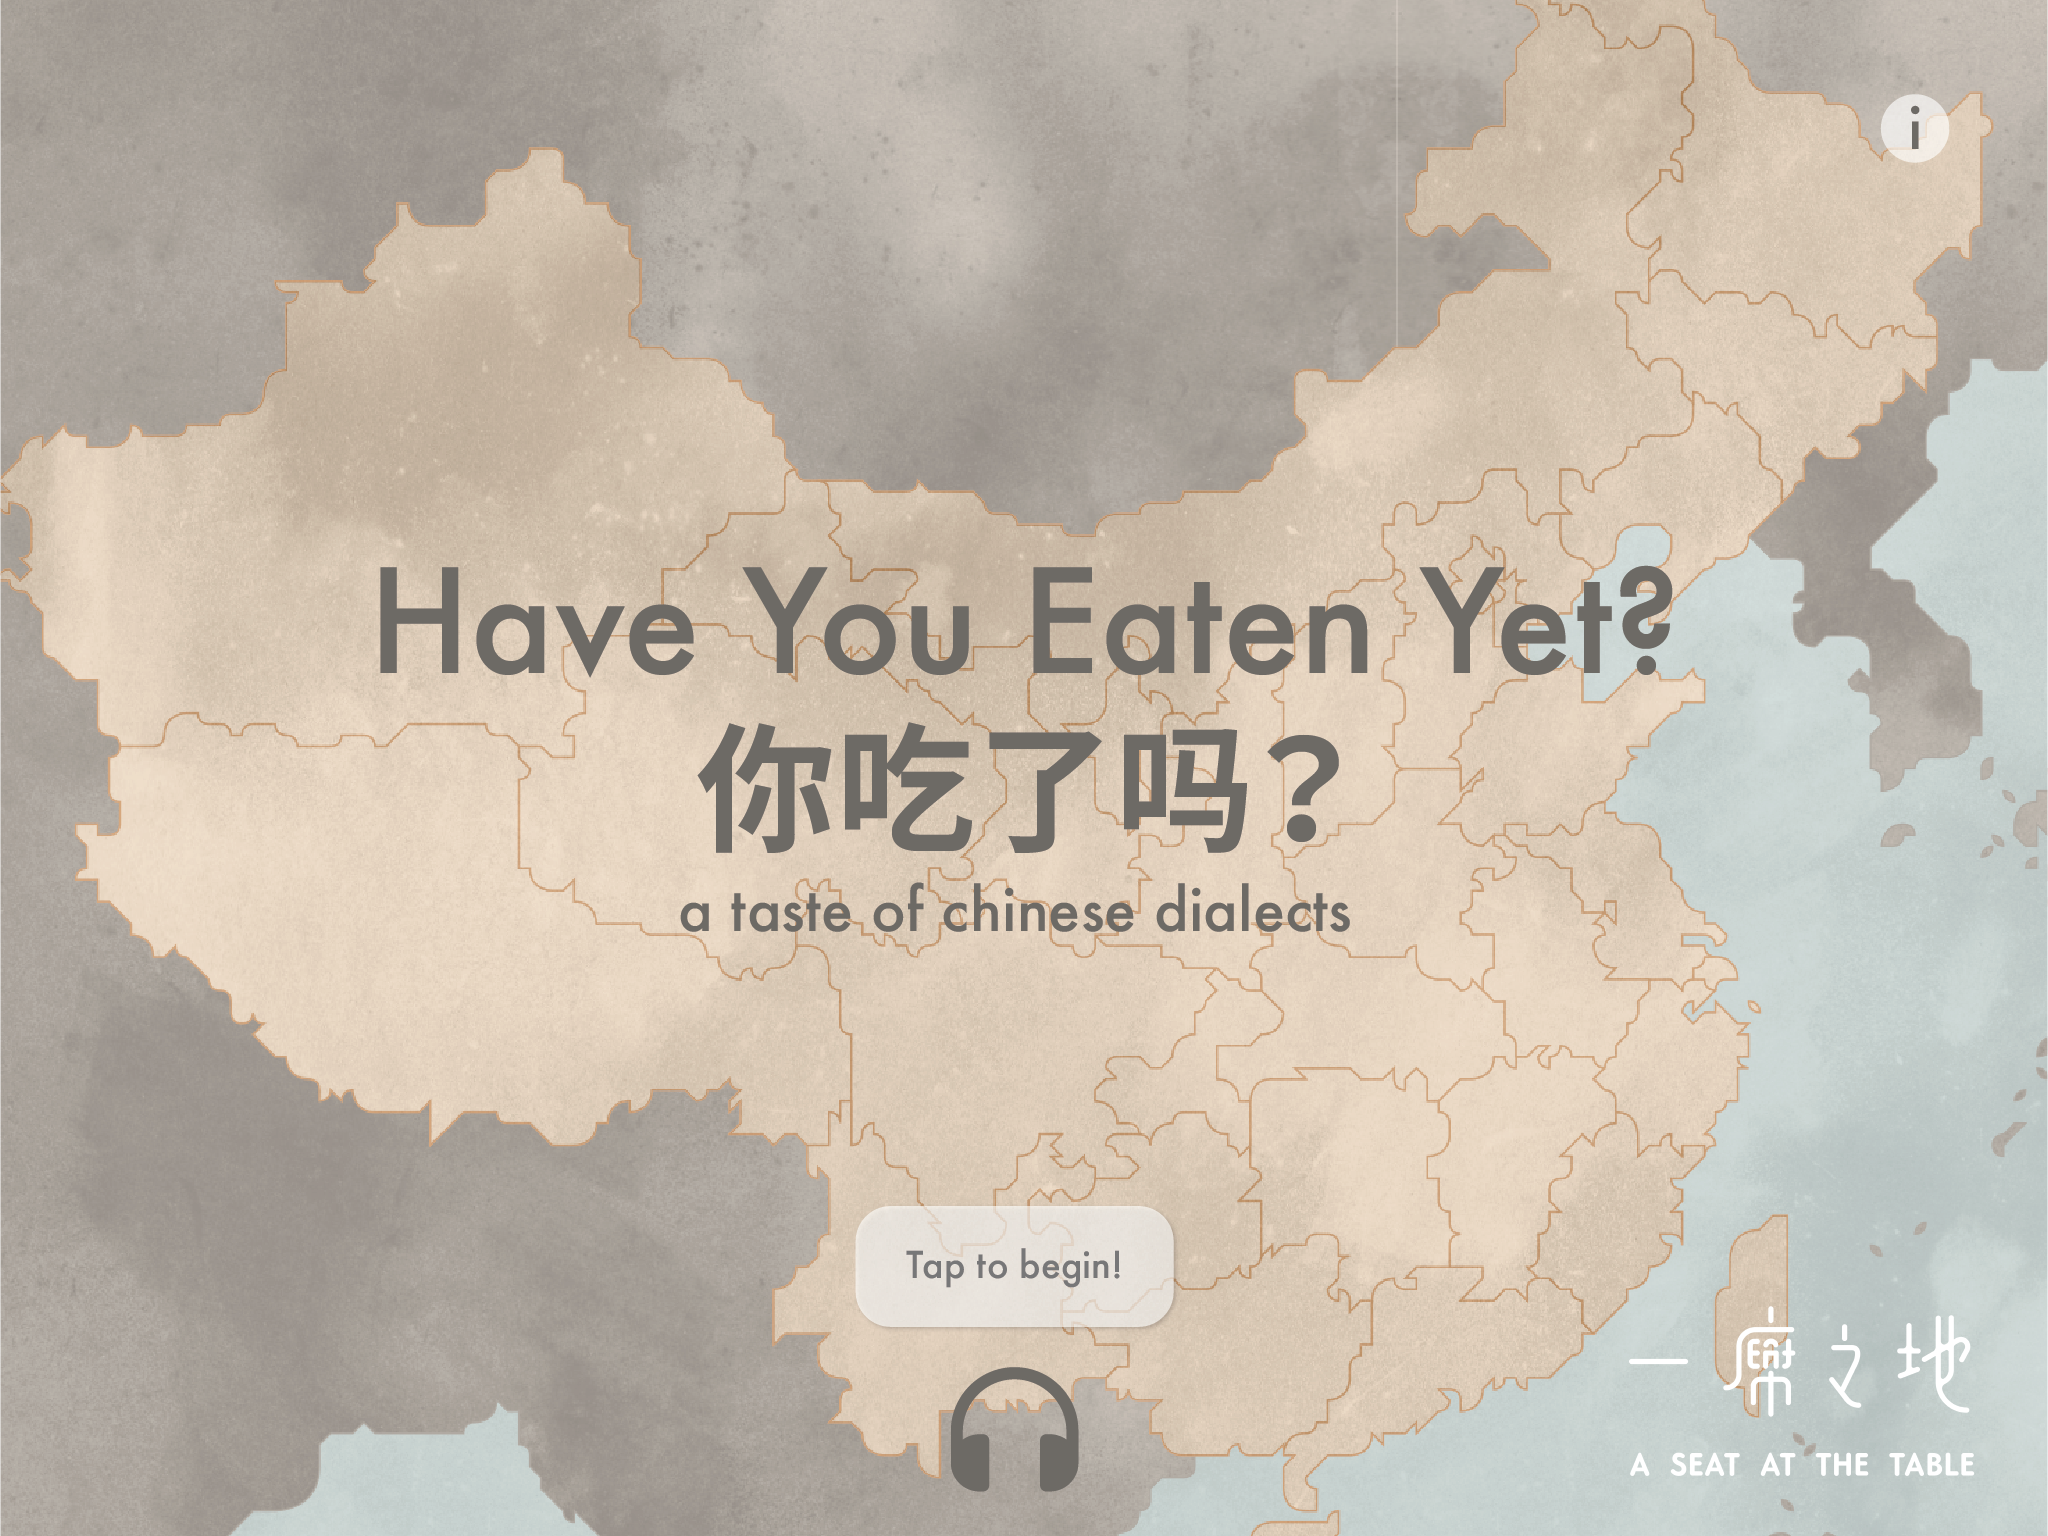 "Have You Eaten Yet?" Title screen